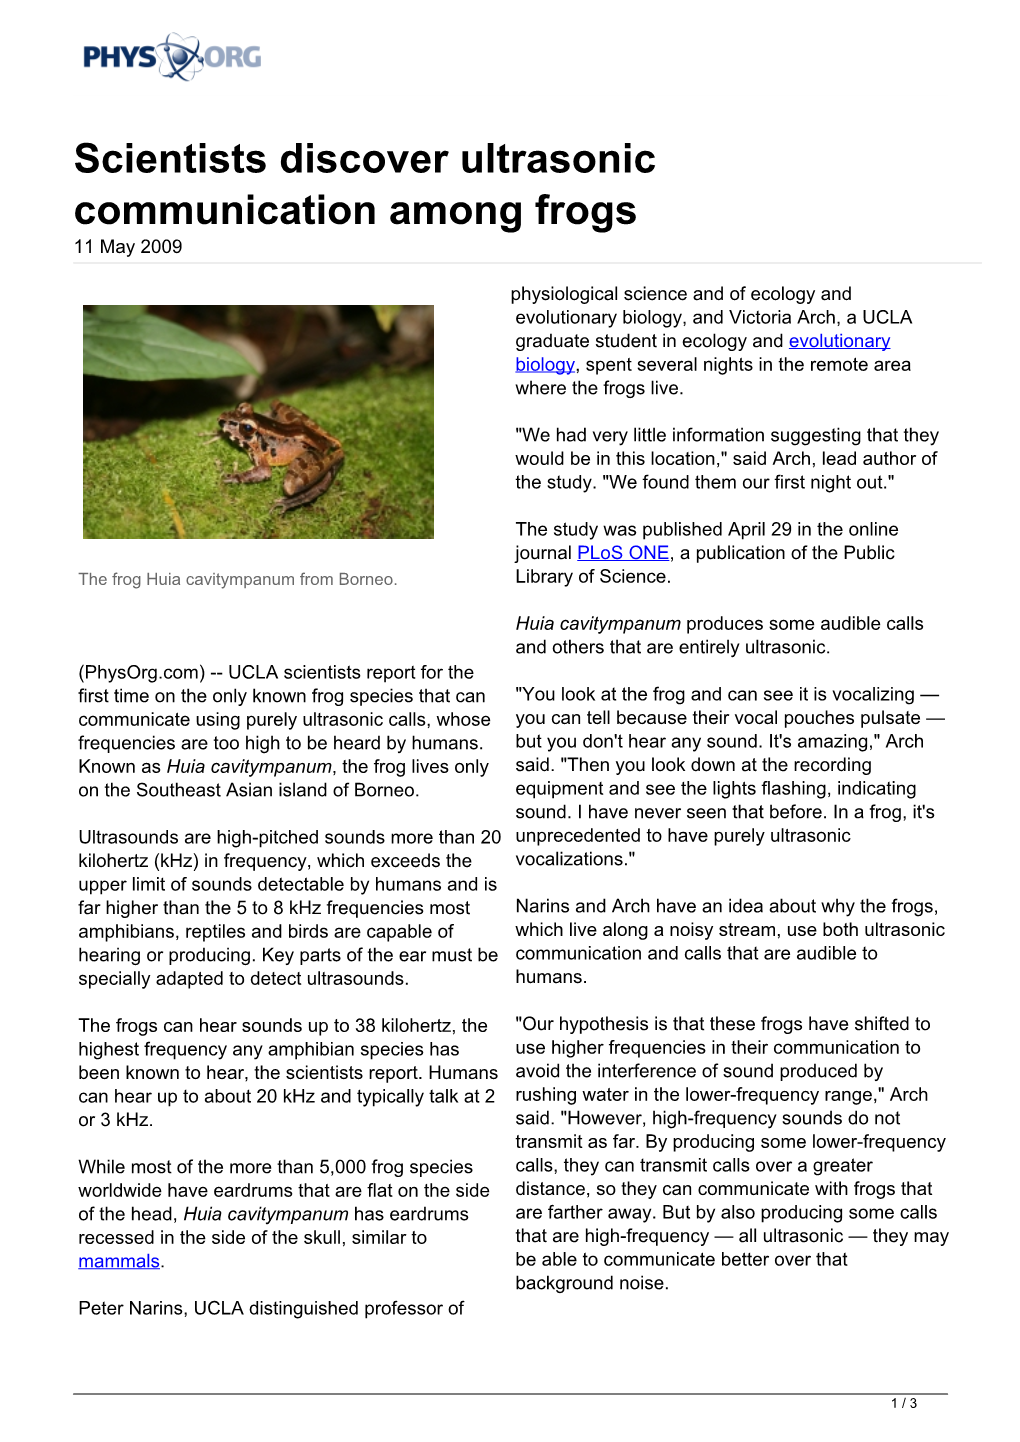 Scientists Discover Ultrasonic Communication Among Frogs 11 May 2009